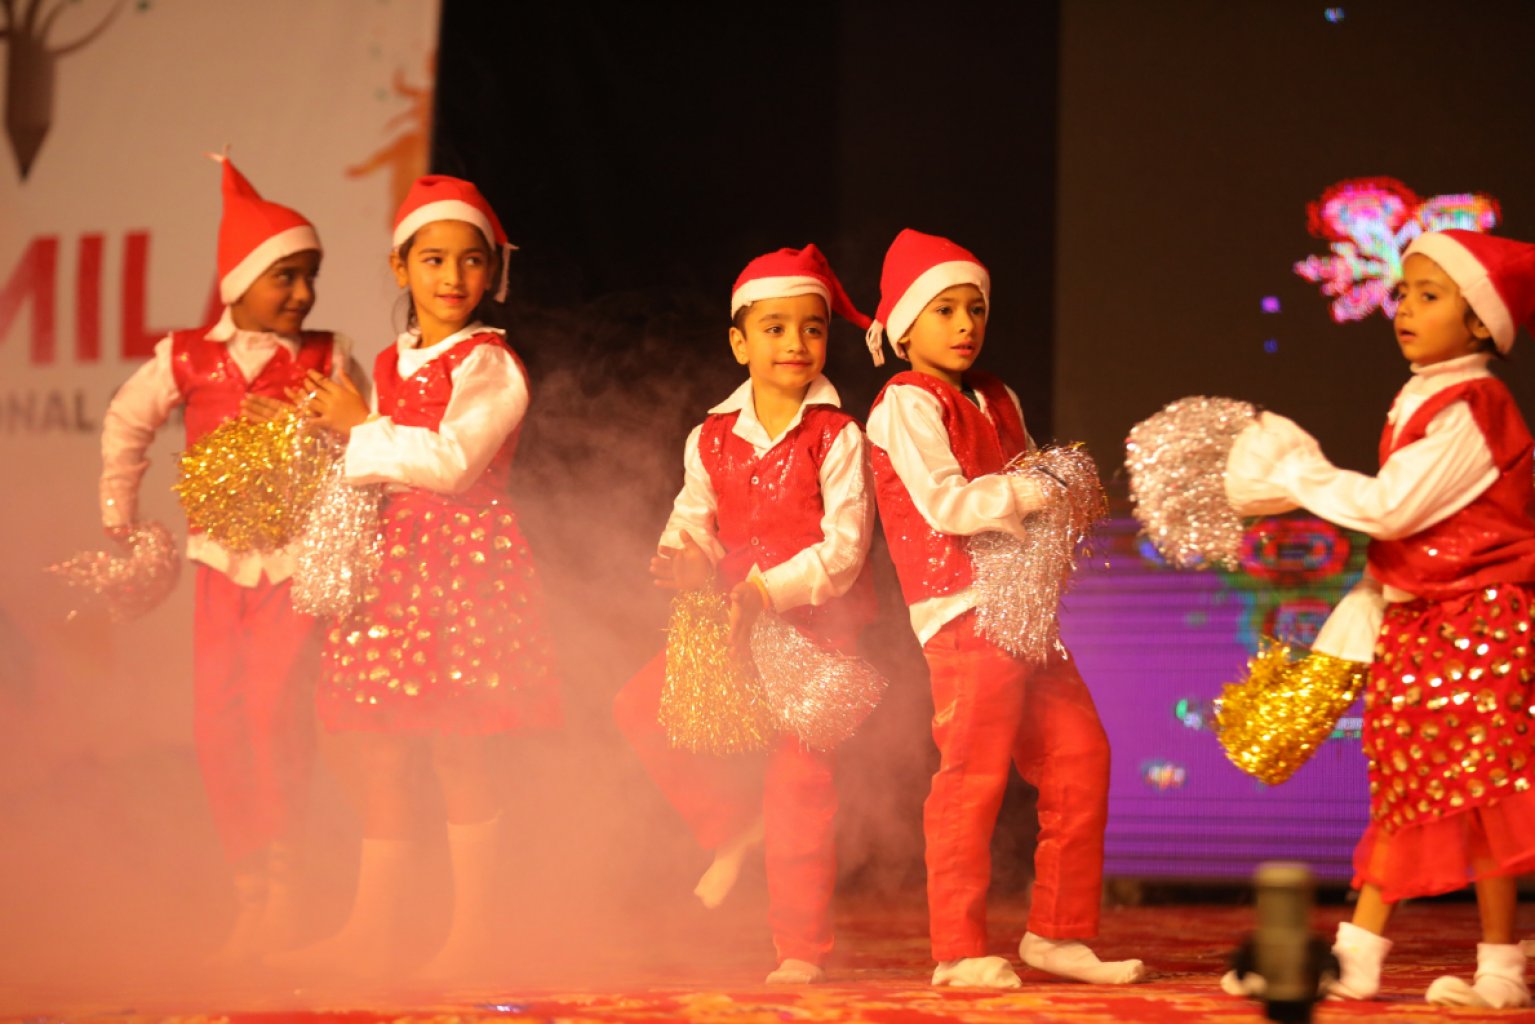 ANNUAL DAY (24-12-2022)